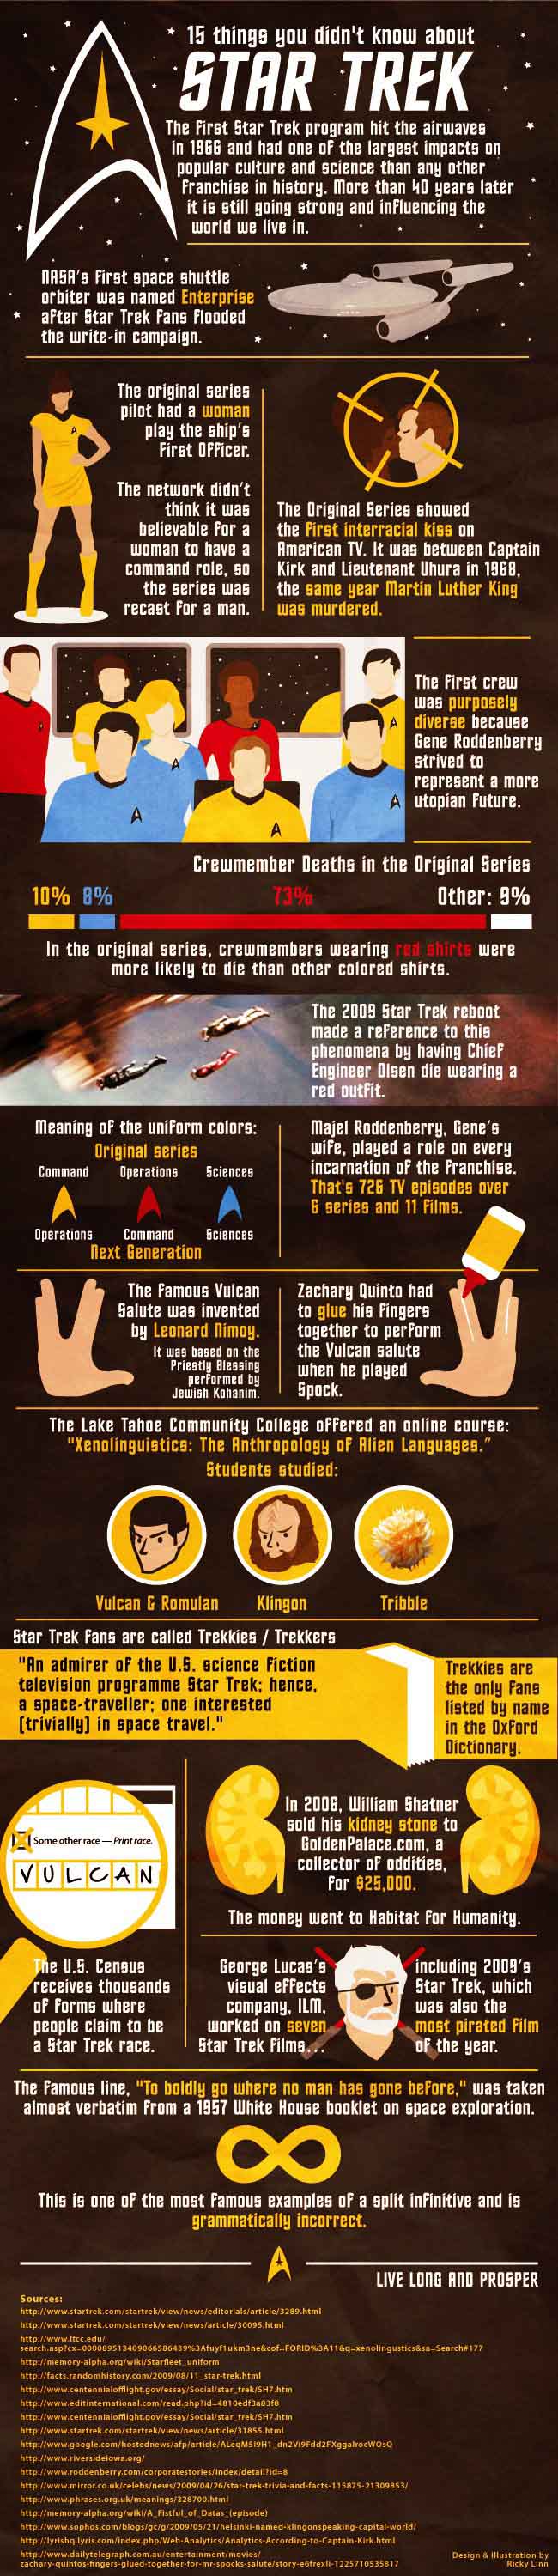 15 things you didnt know about Star Trek